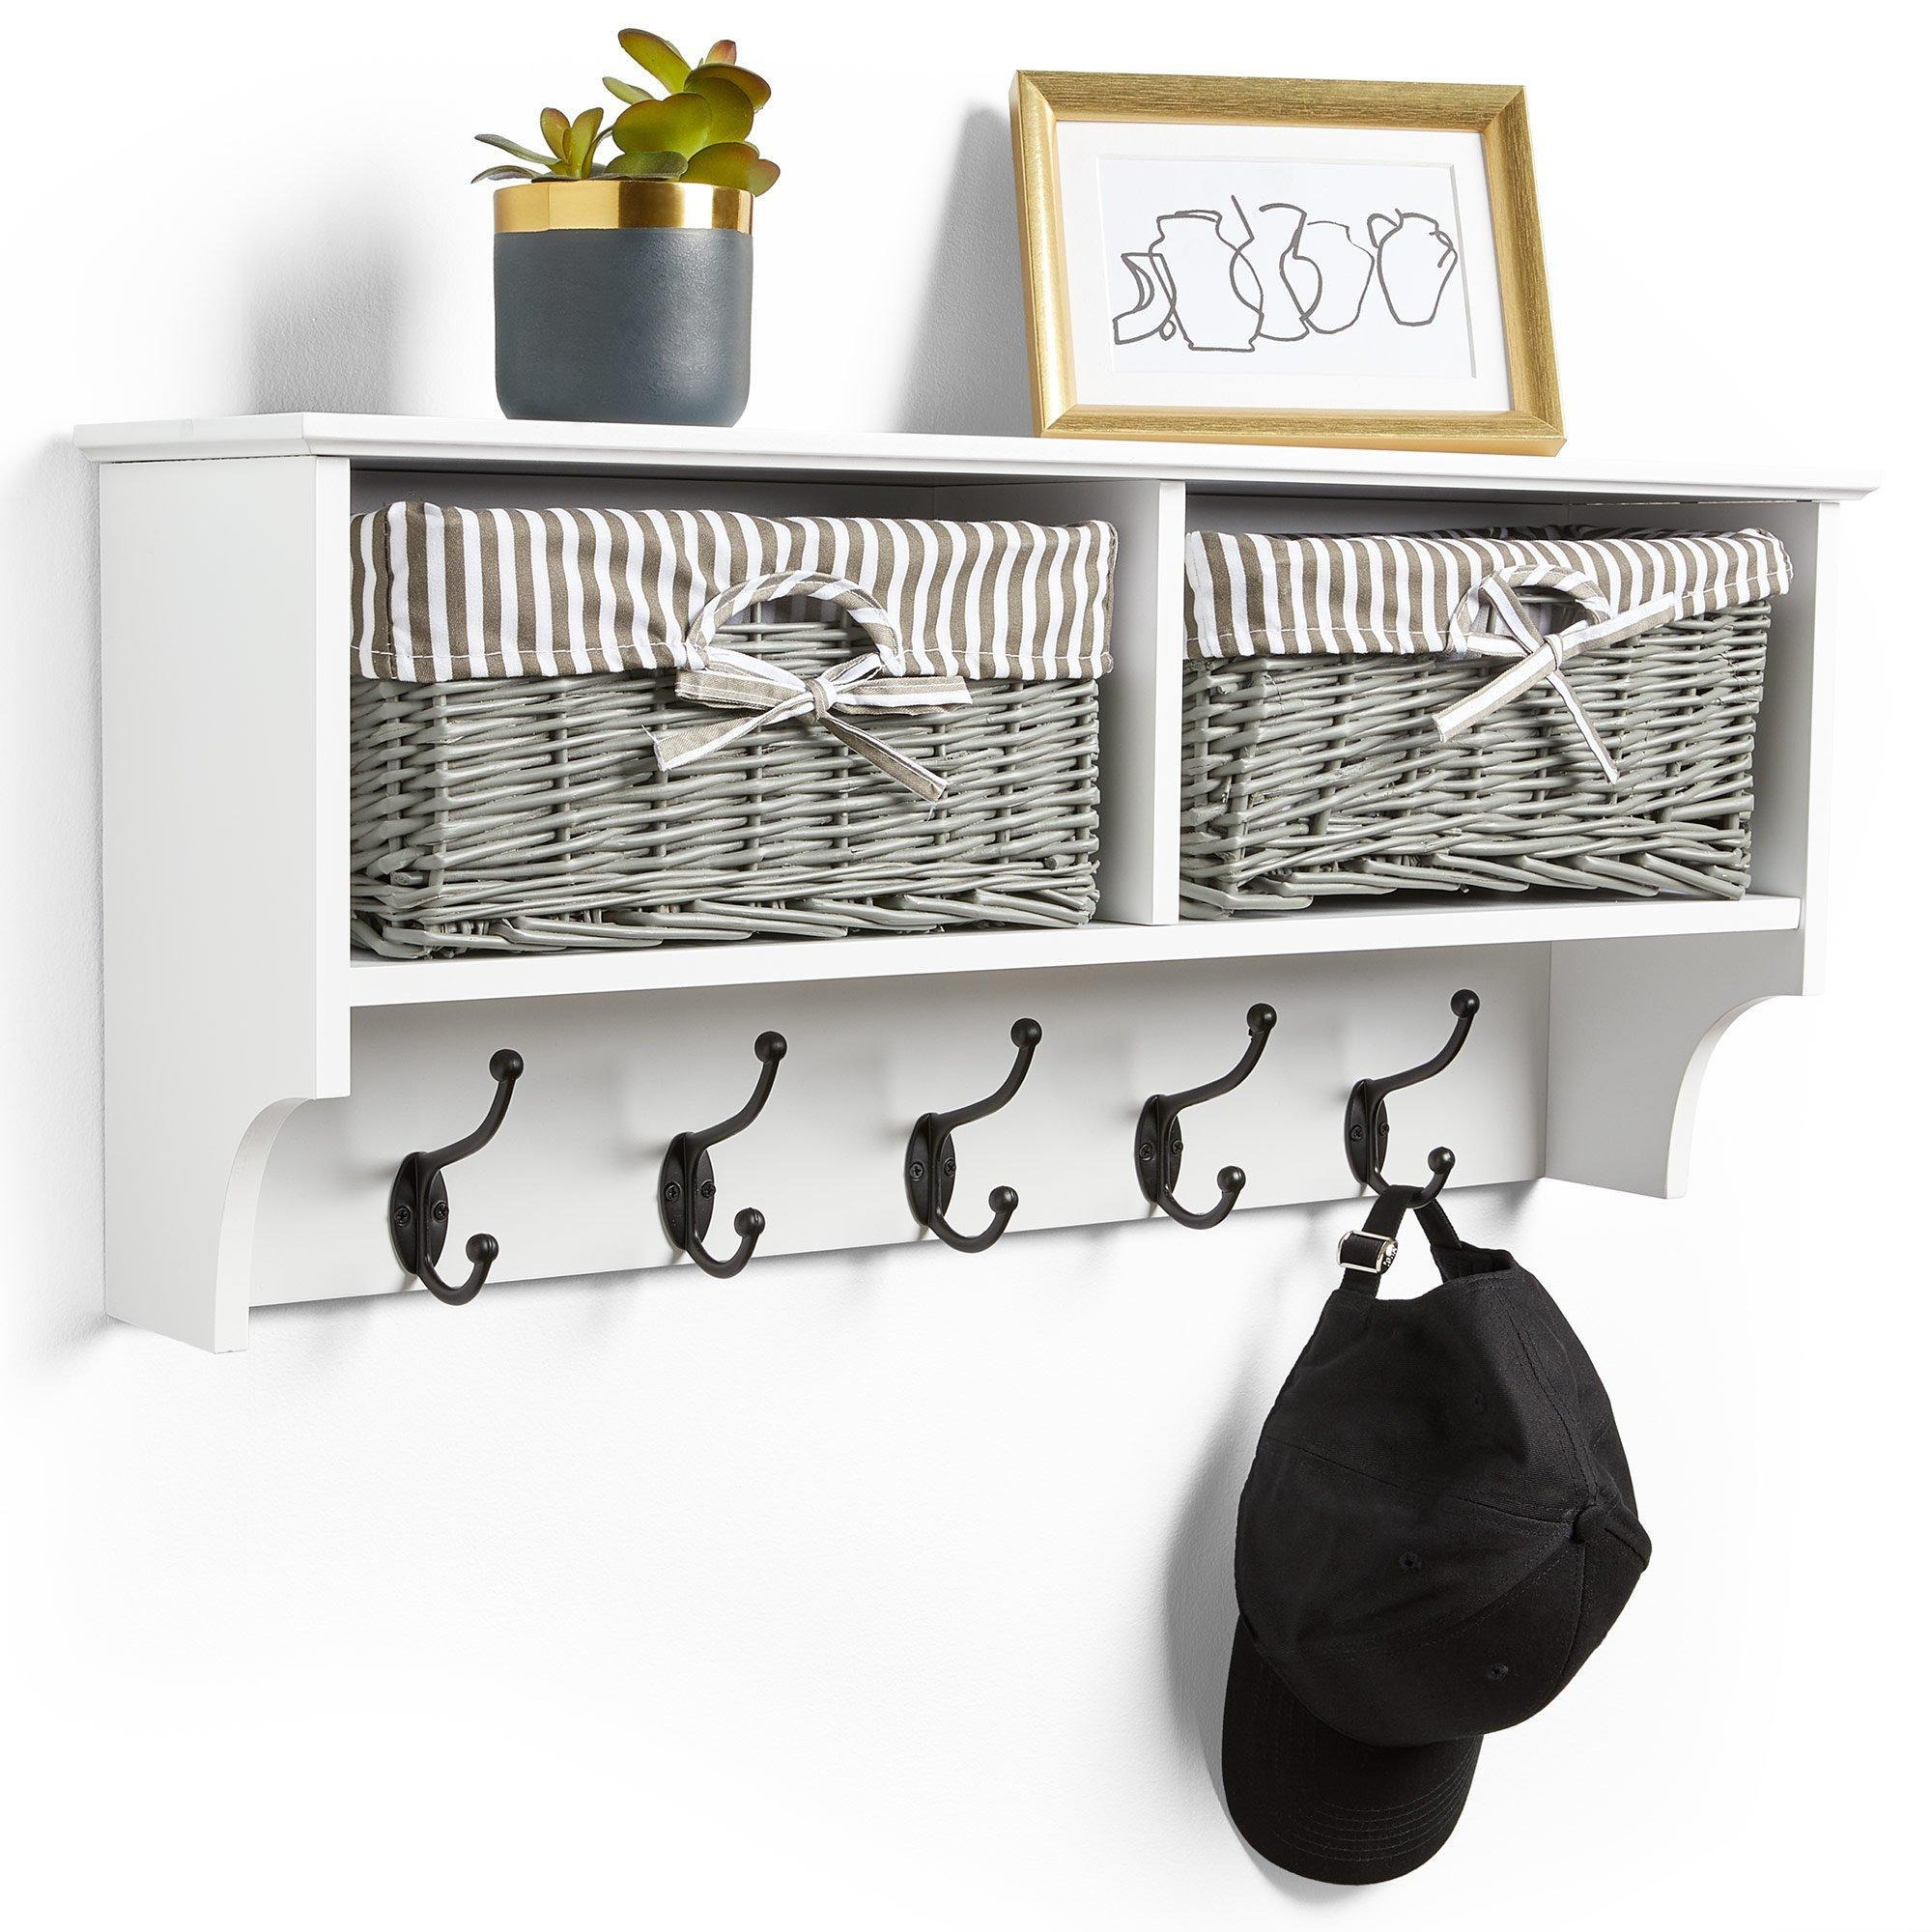 Wall Mounted with 2 Wicker Baskets Coat Hooks - image 1